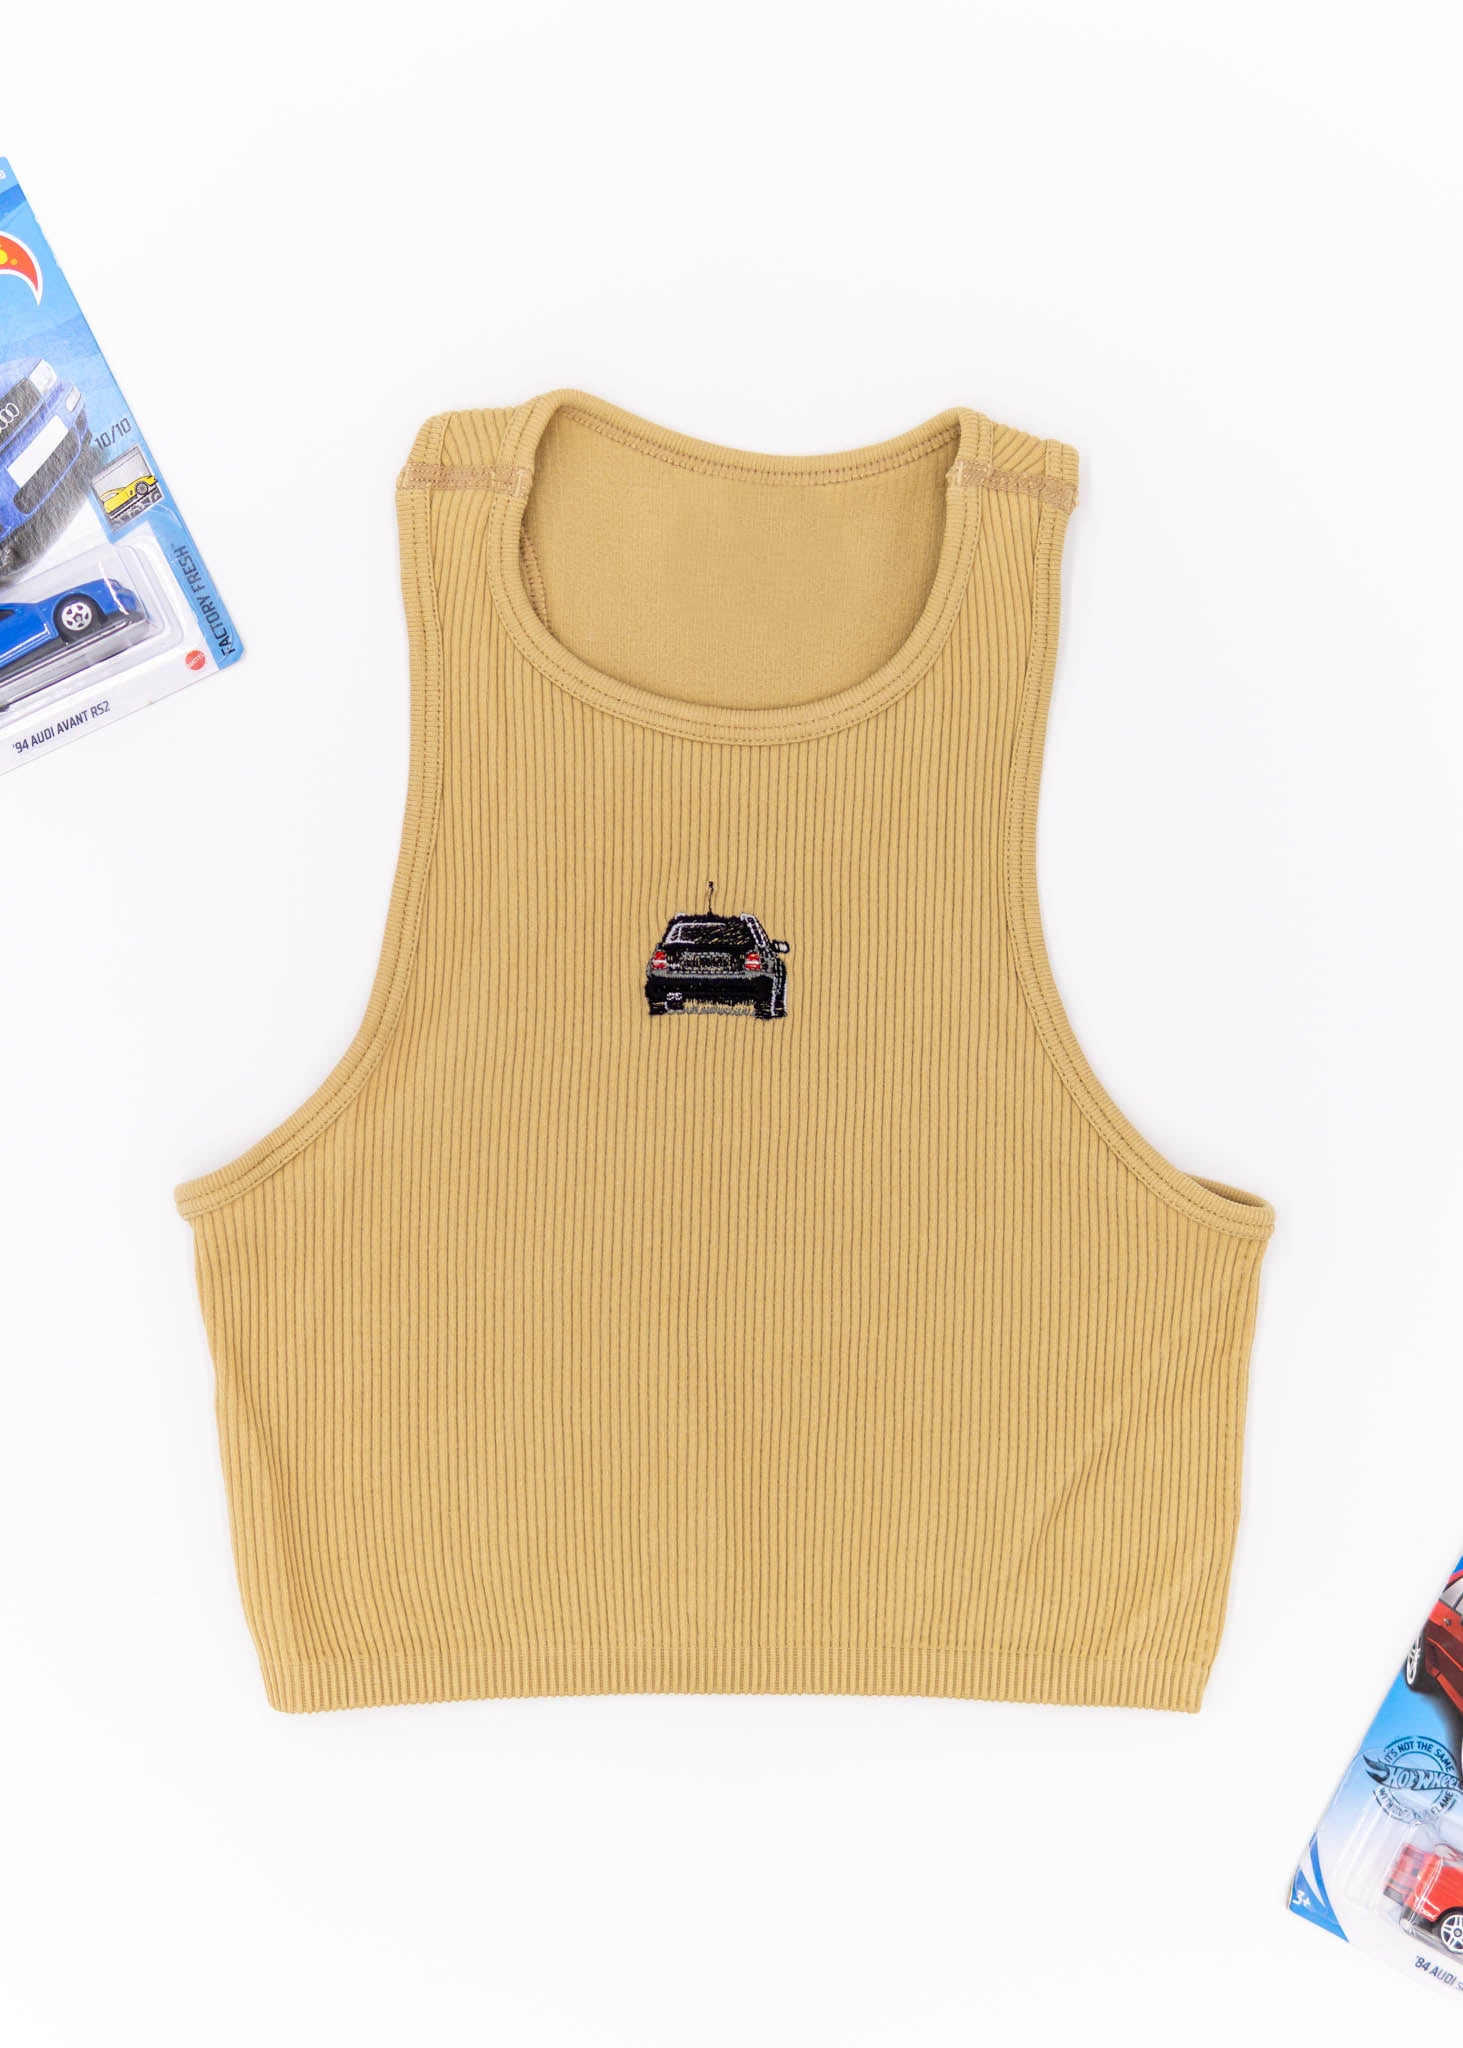 A khaki Audi crop top for women. Photo is a front view of the top with an embroidered black Audi B5 RS4. Fabric composition is polyester, and elastine. The material is stretchy, ribbed, and non-transparent. The style of this shirt is sleeveless, with a crewneck neckline.